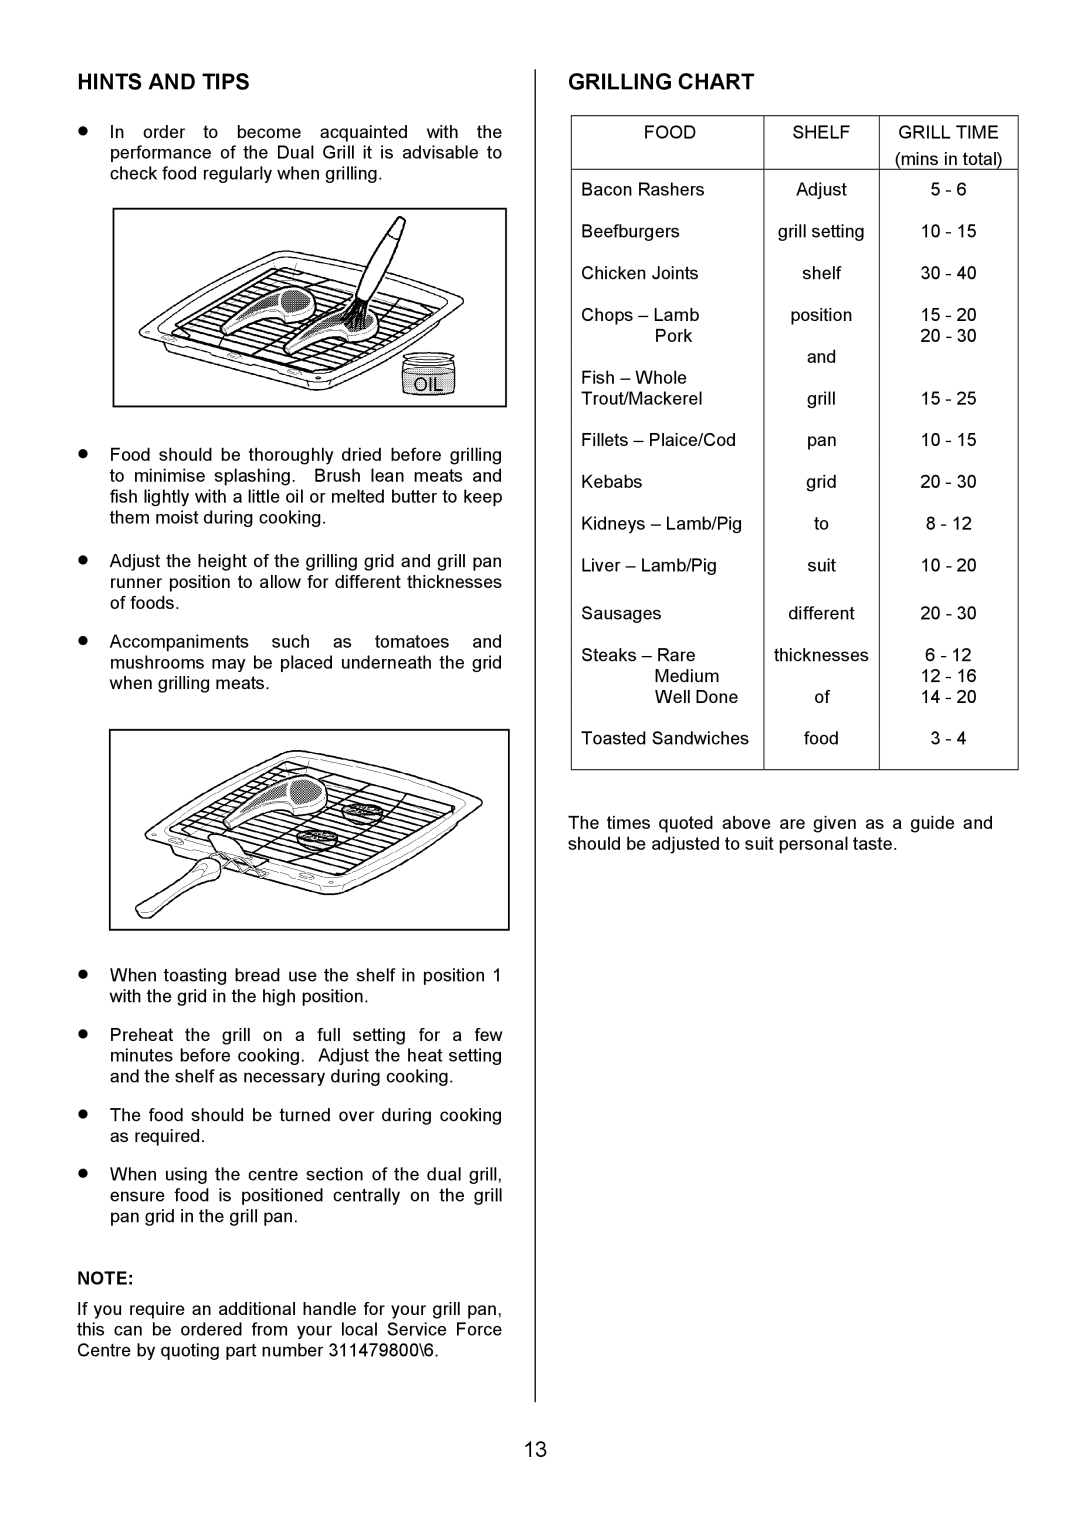 Electrolux SM 554 installation instructions Grilling Chart, Food Shelf Grill Time 